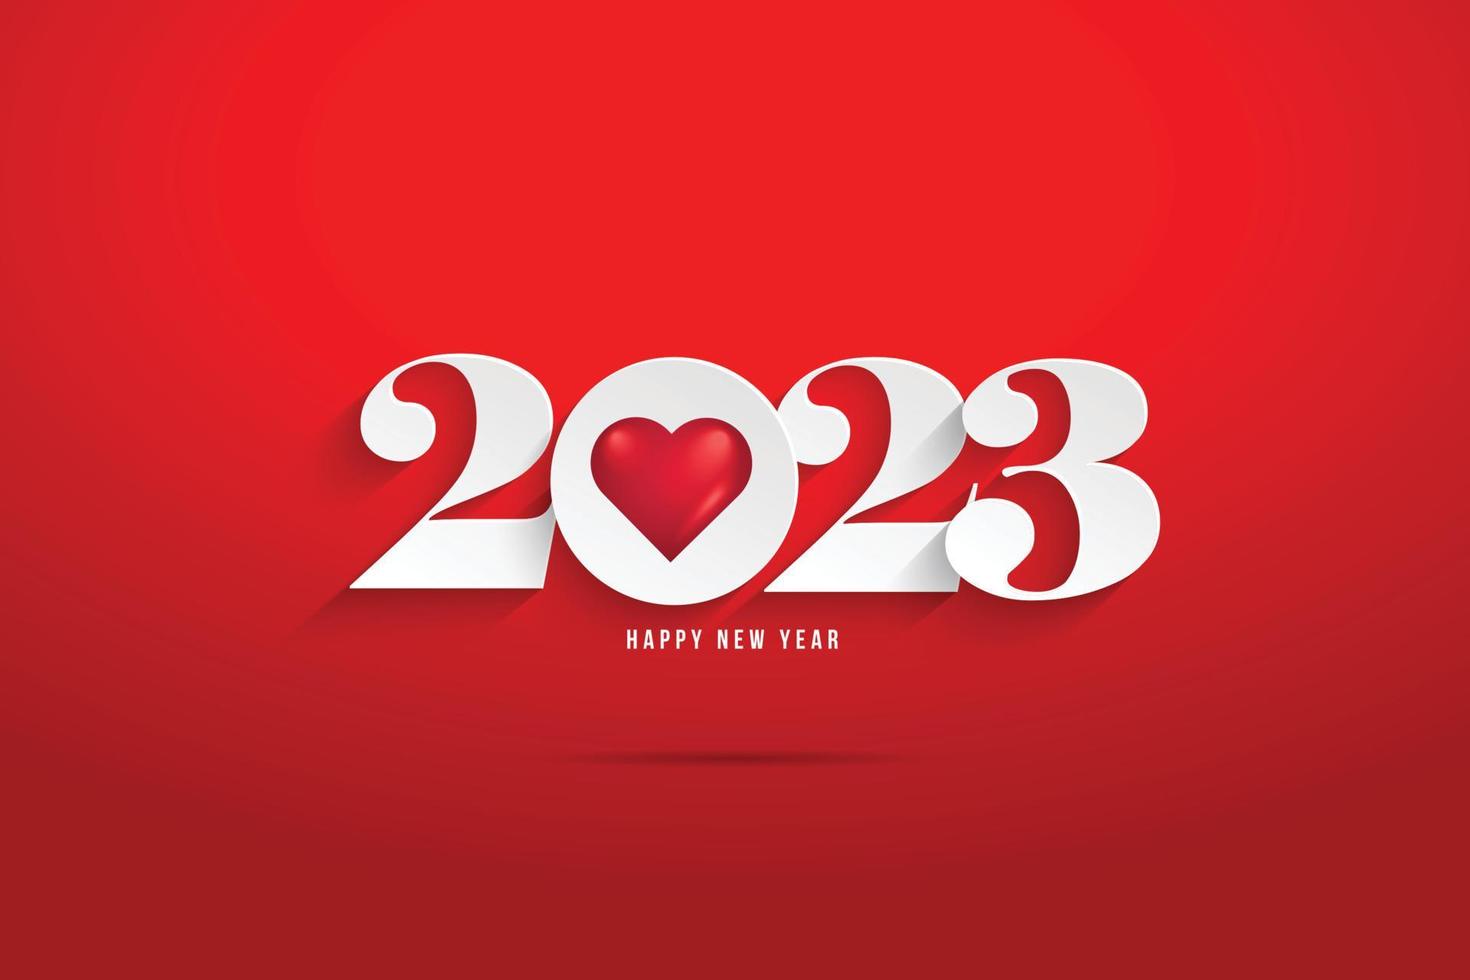 Happy new year 2023 white numbers paper cut style on a red background vector illustration